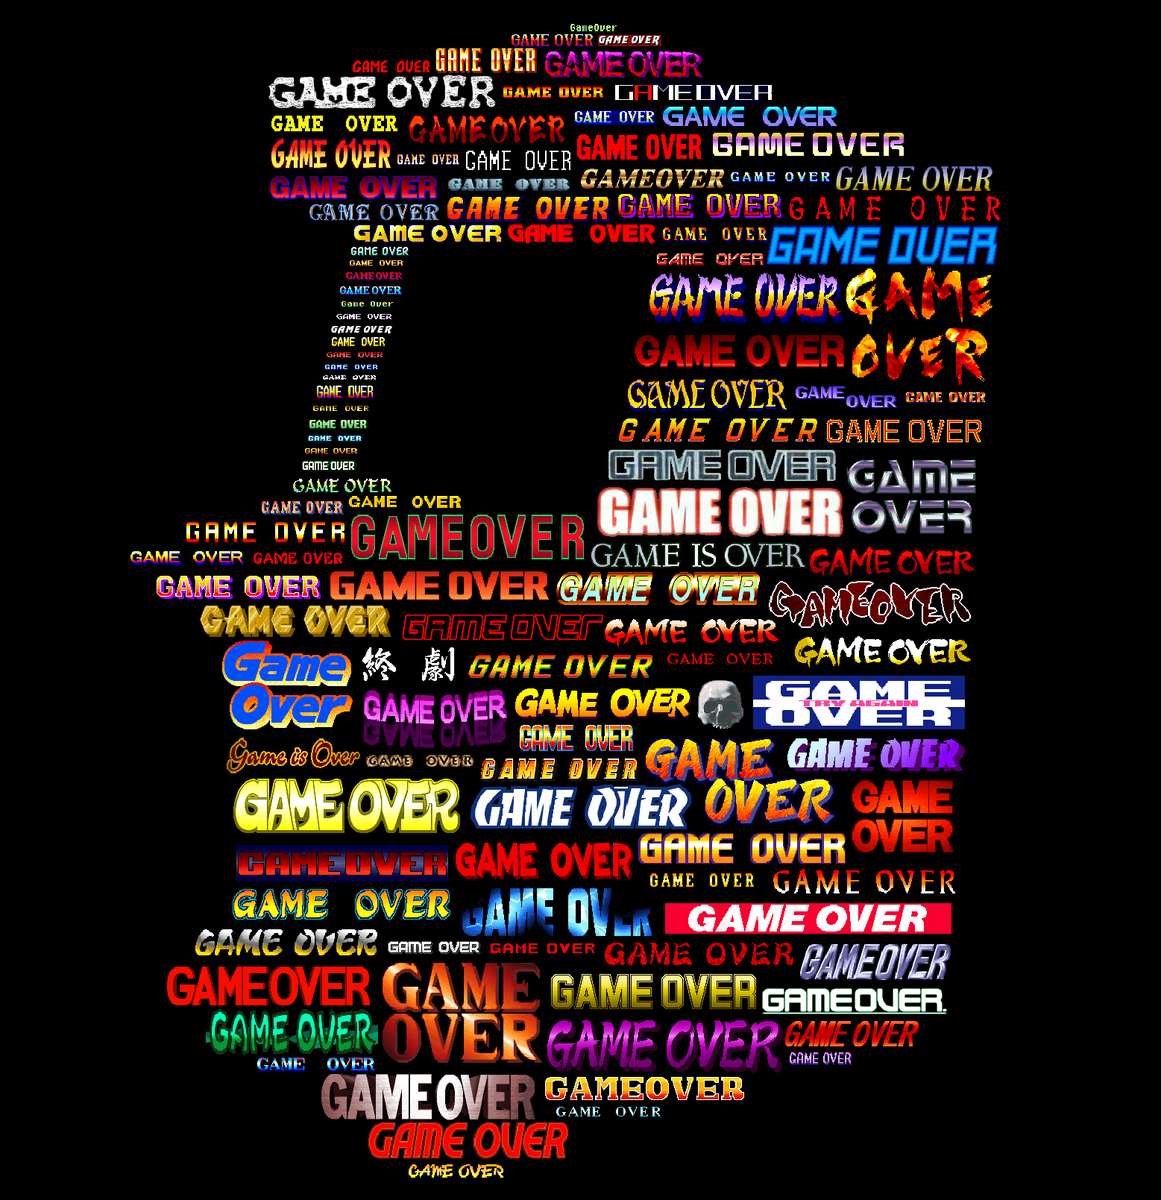 Over 120 'Game Over' logos from various fighting games...reimagined into the shape of an arcade cab (shoutout to @BigRuckONLINE for the cab idea).